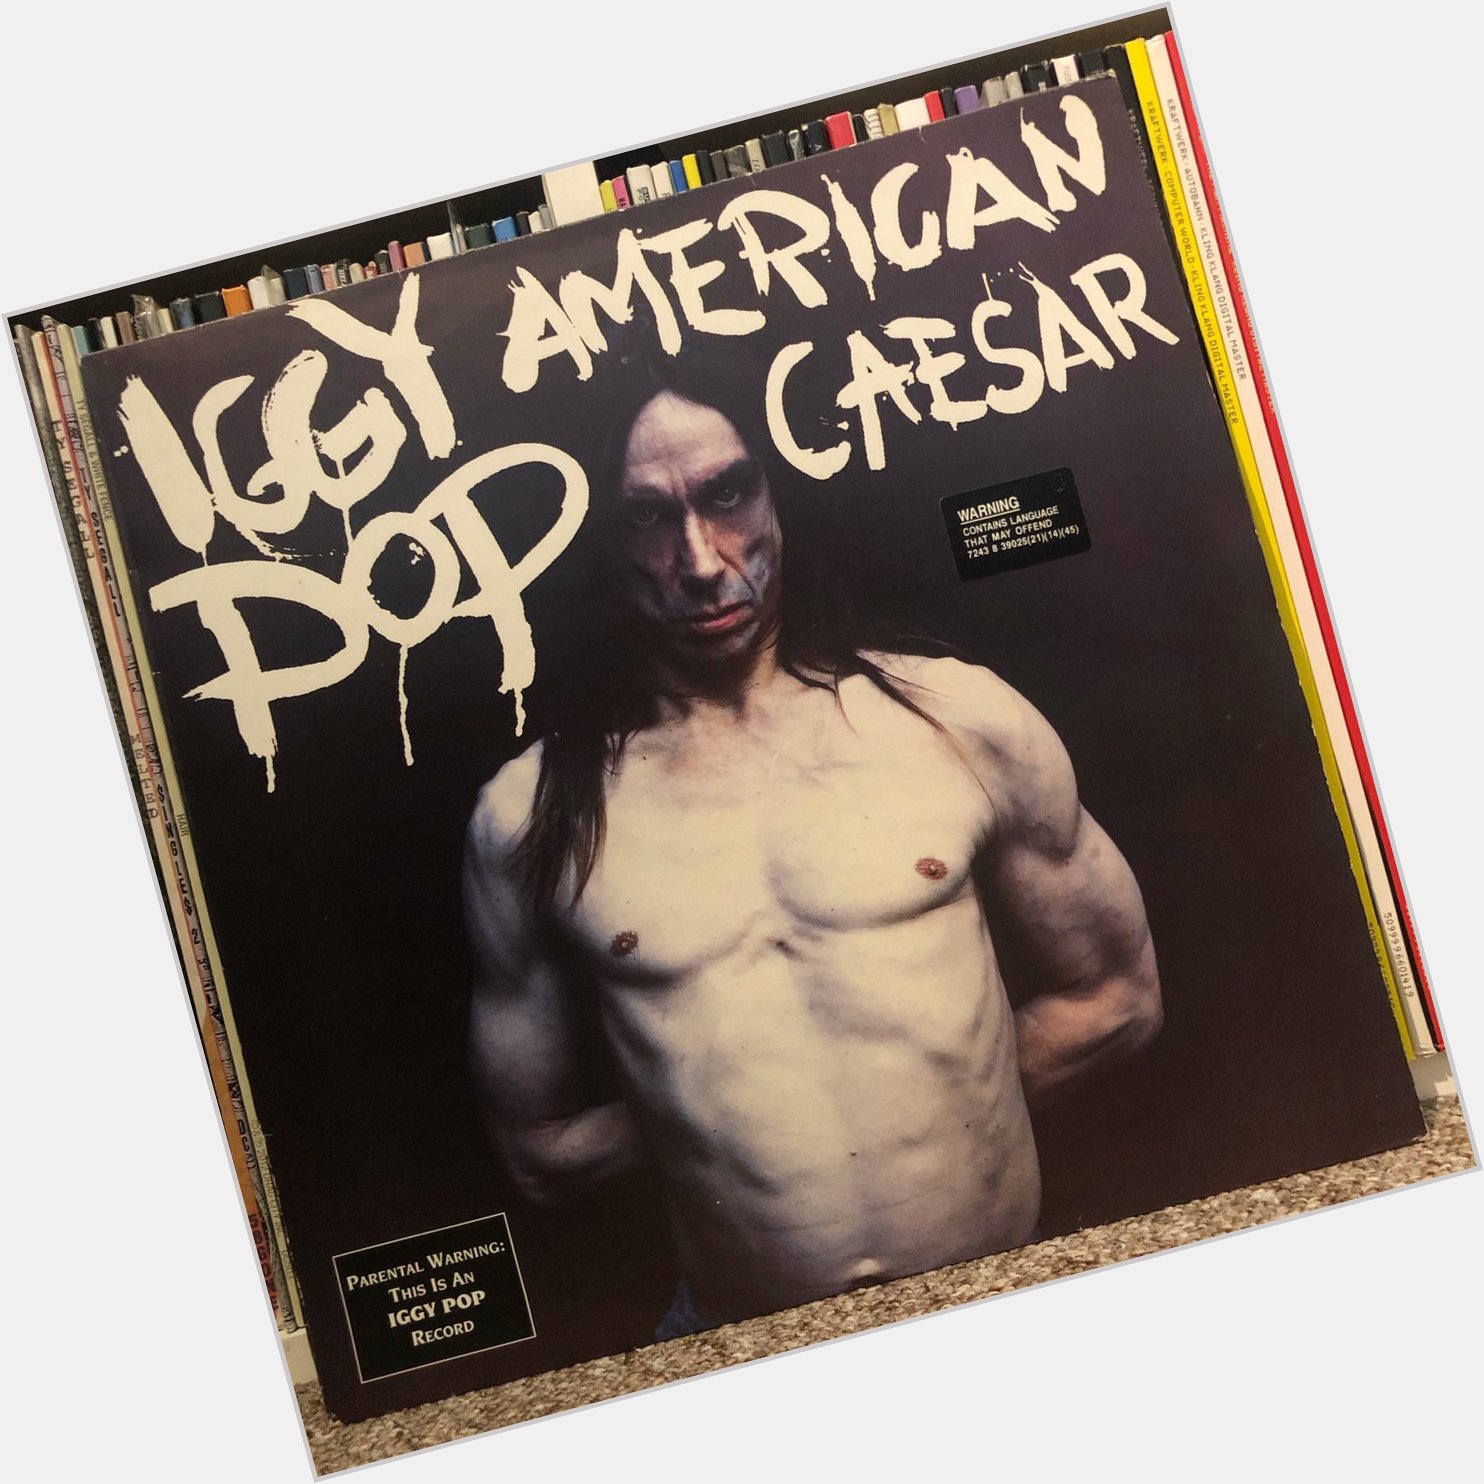  Parental warning: This is an Iggy Pop record ...! Happy birthday Iggy 